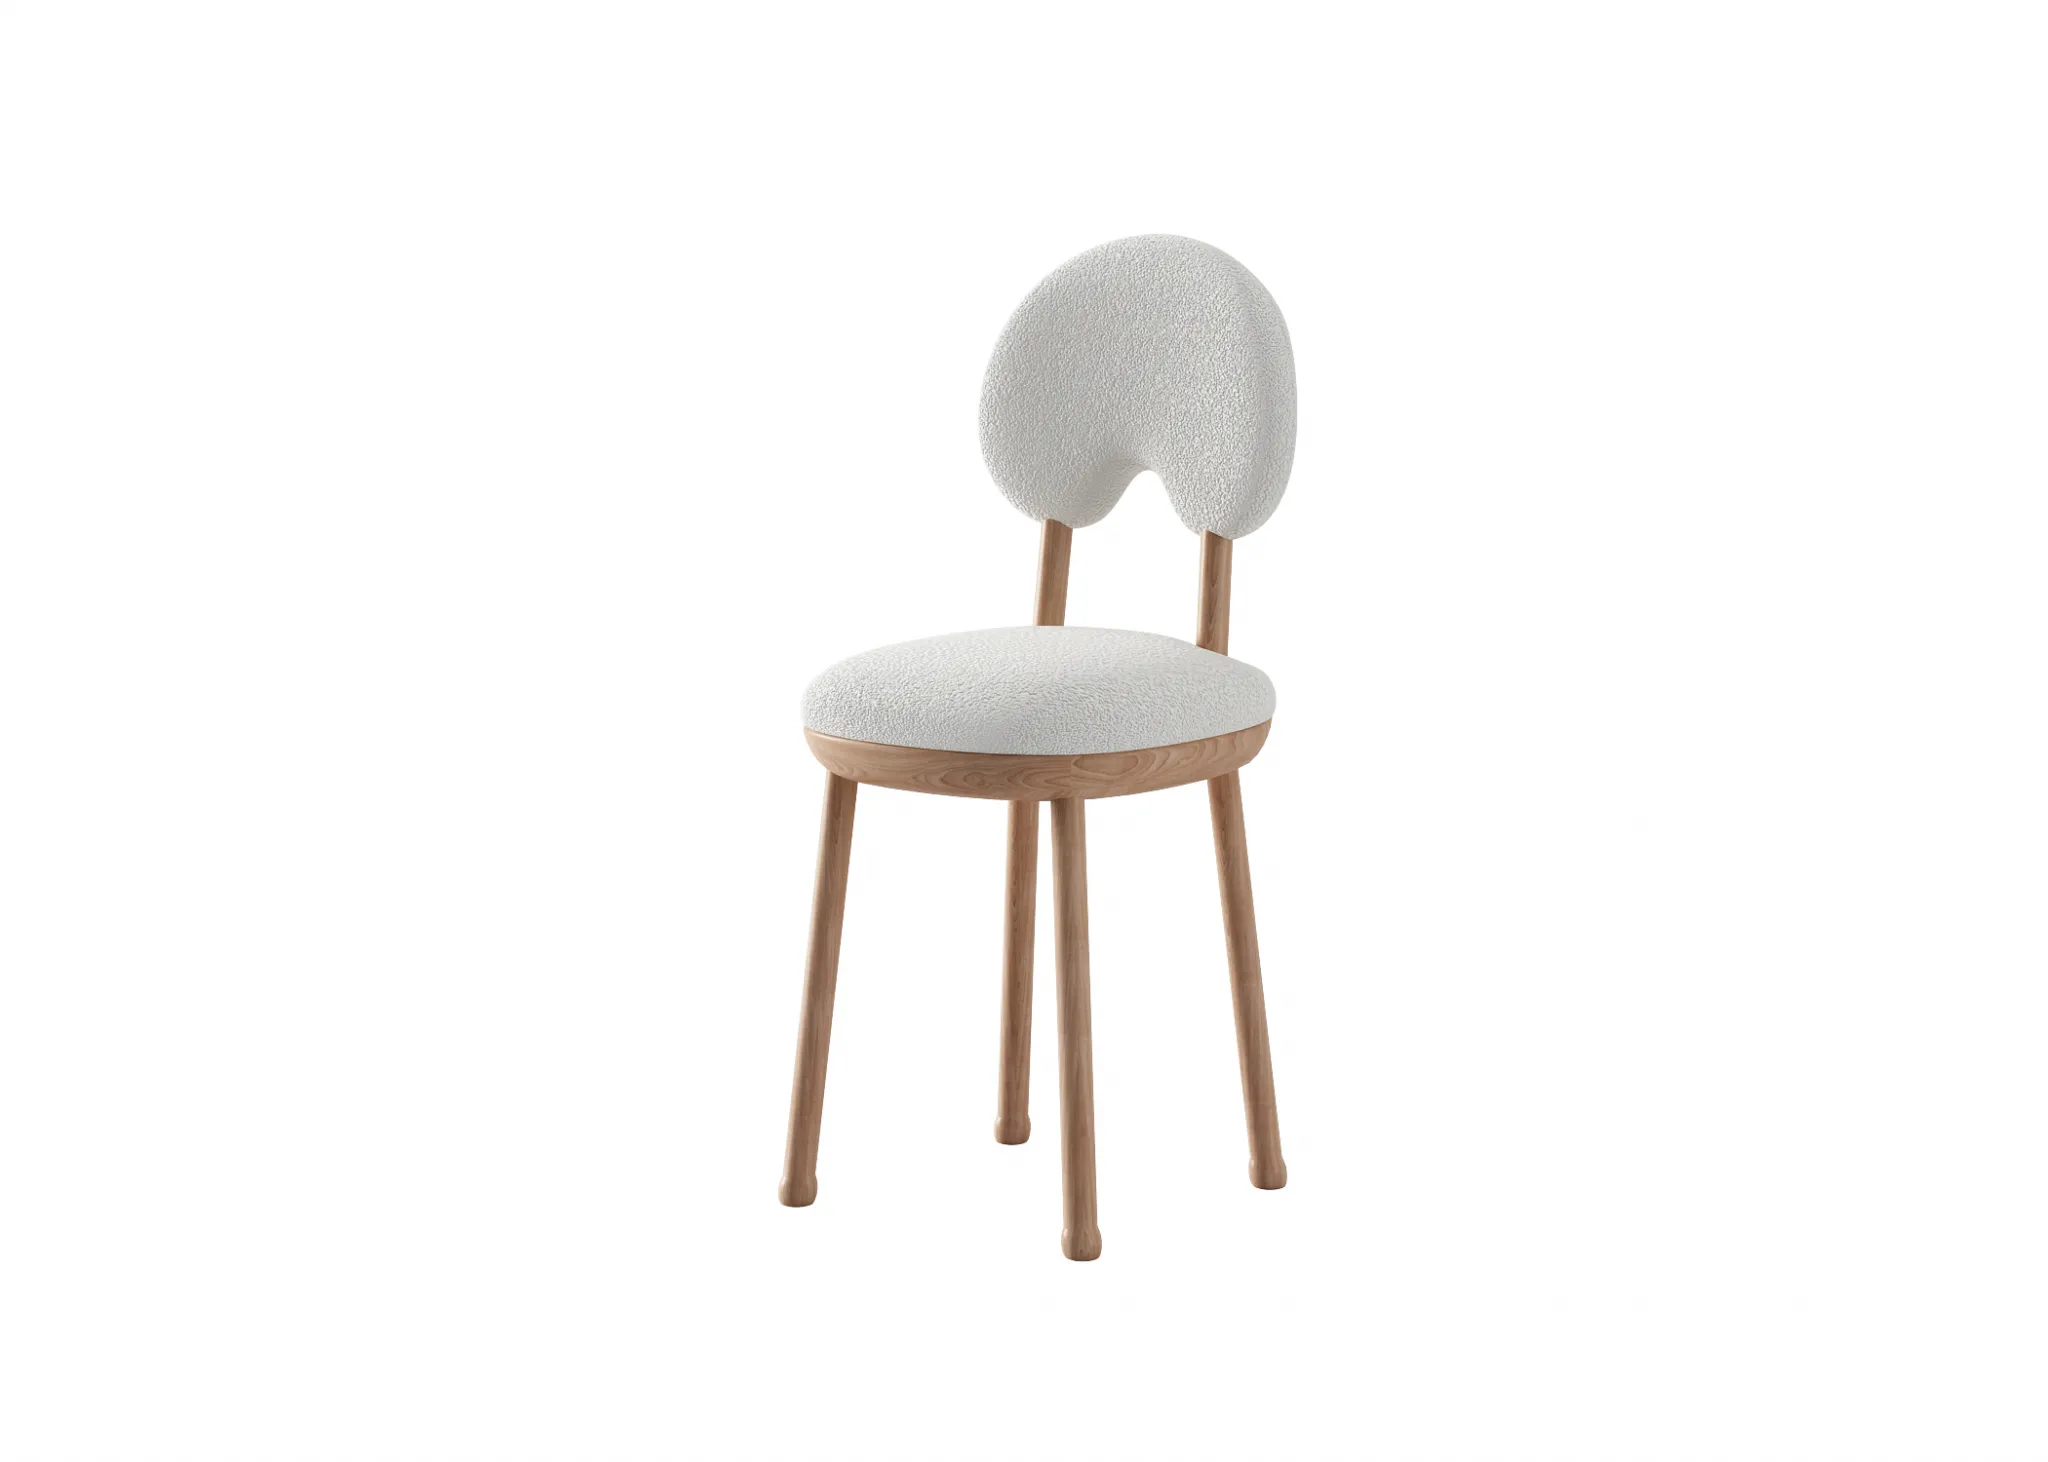 FURNITURE 3D MODELS – CHAIRS – 0400